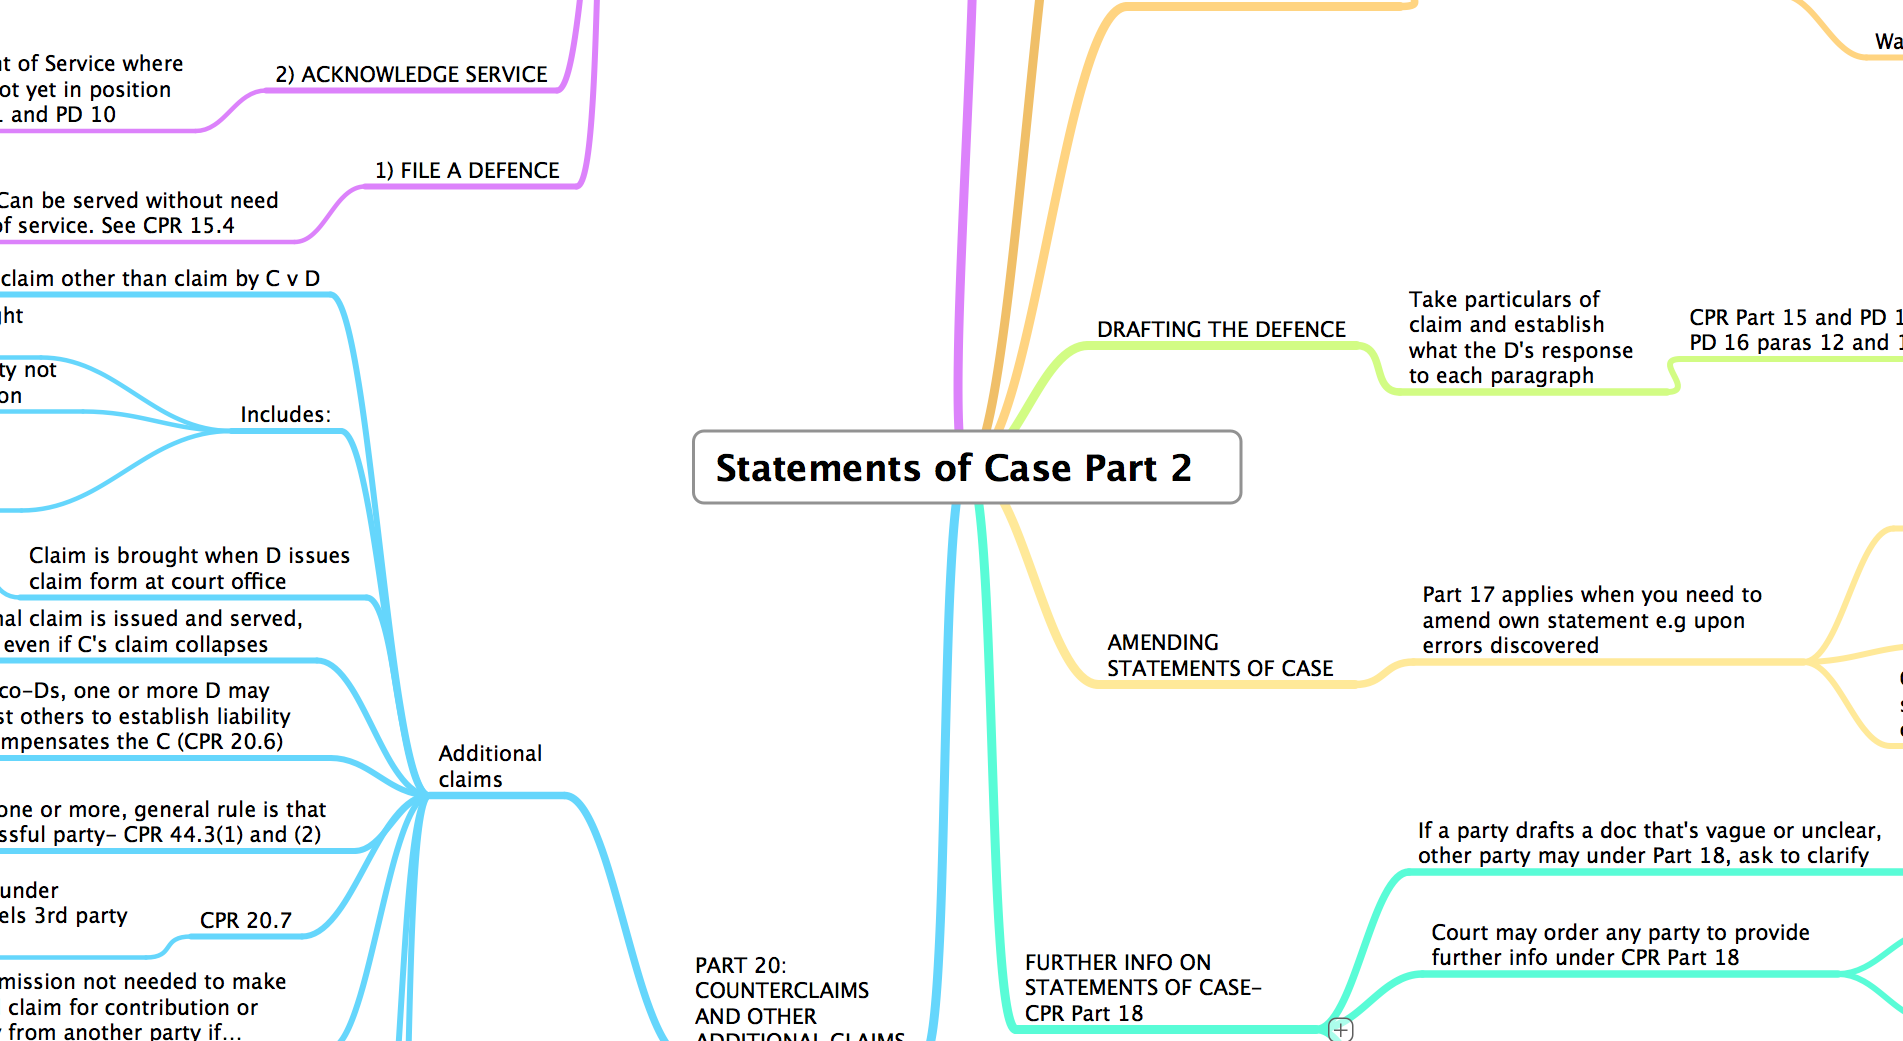 STATEMENTS OF CASE 2